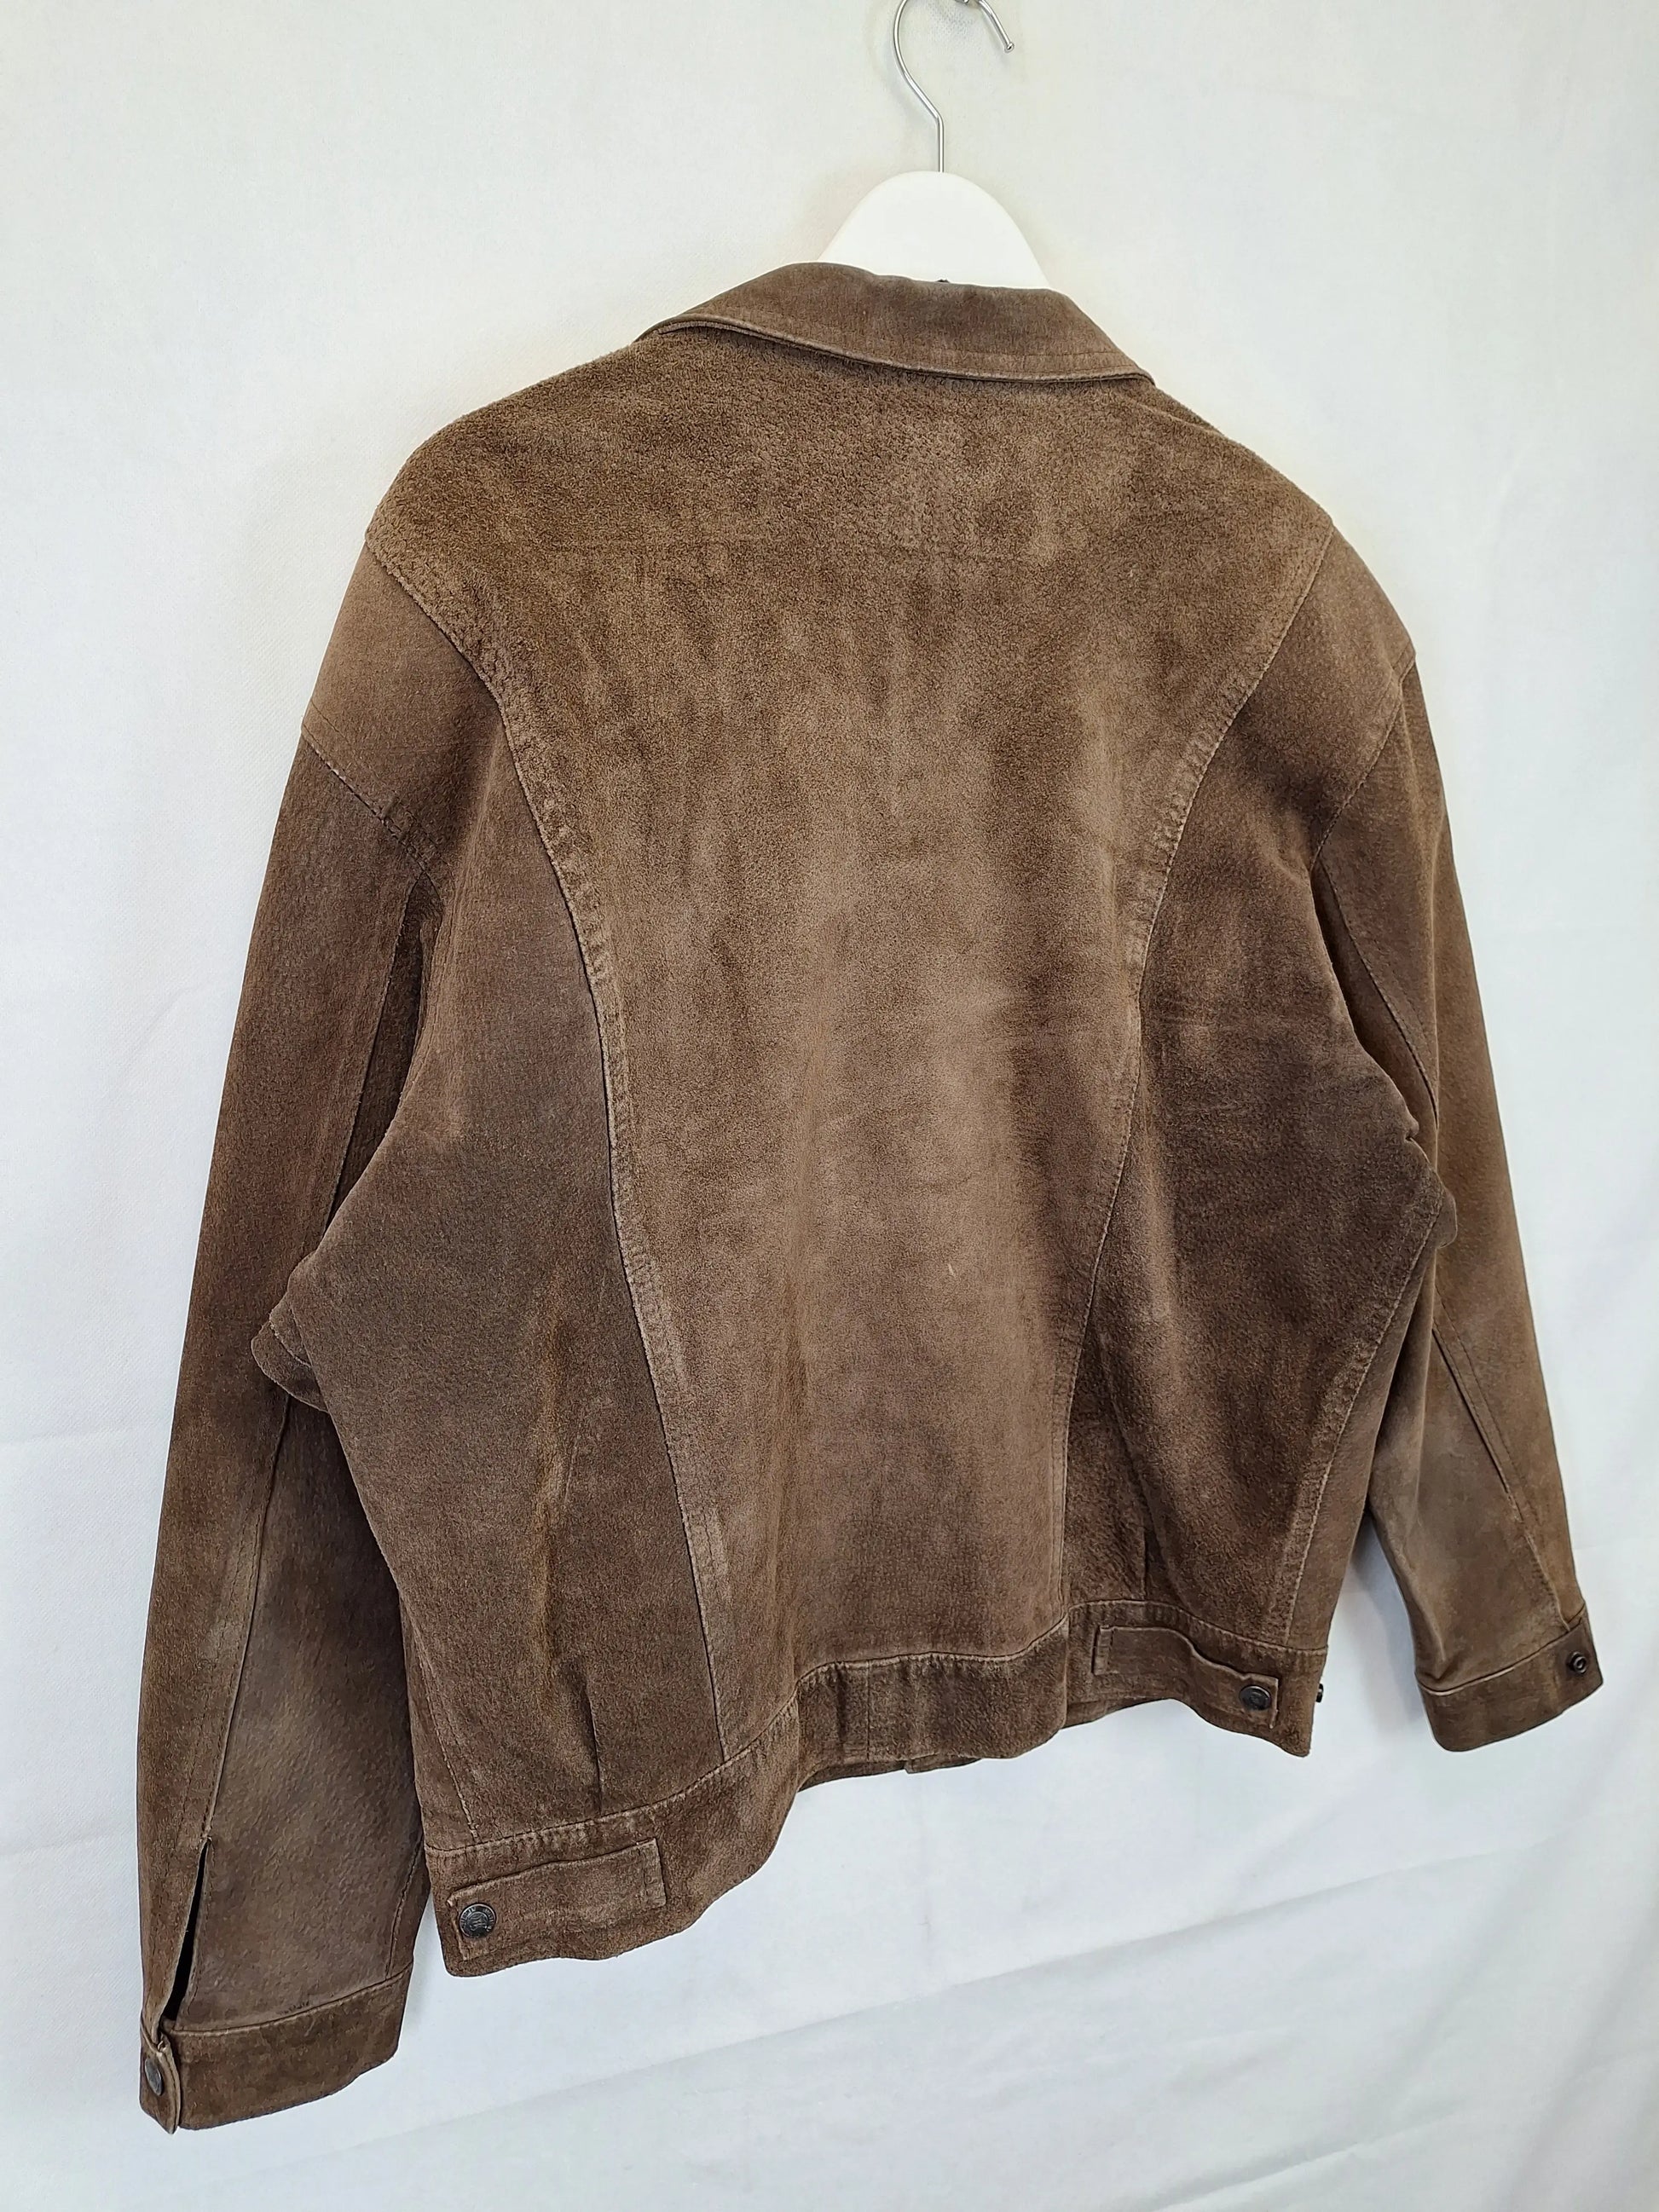 Jacques Leather Suede Western Style Leather Jacket Size M by SwapUp-Online Second Hand Store-Online Thrift Store